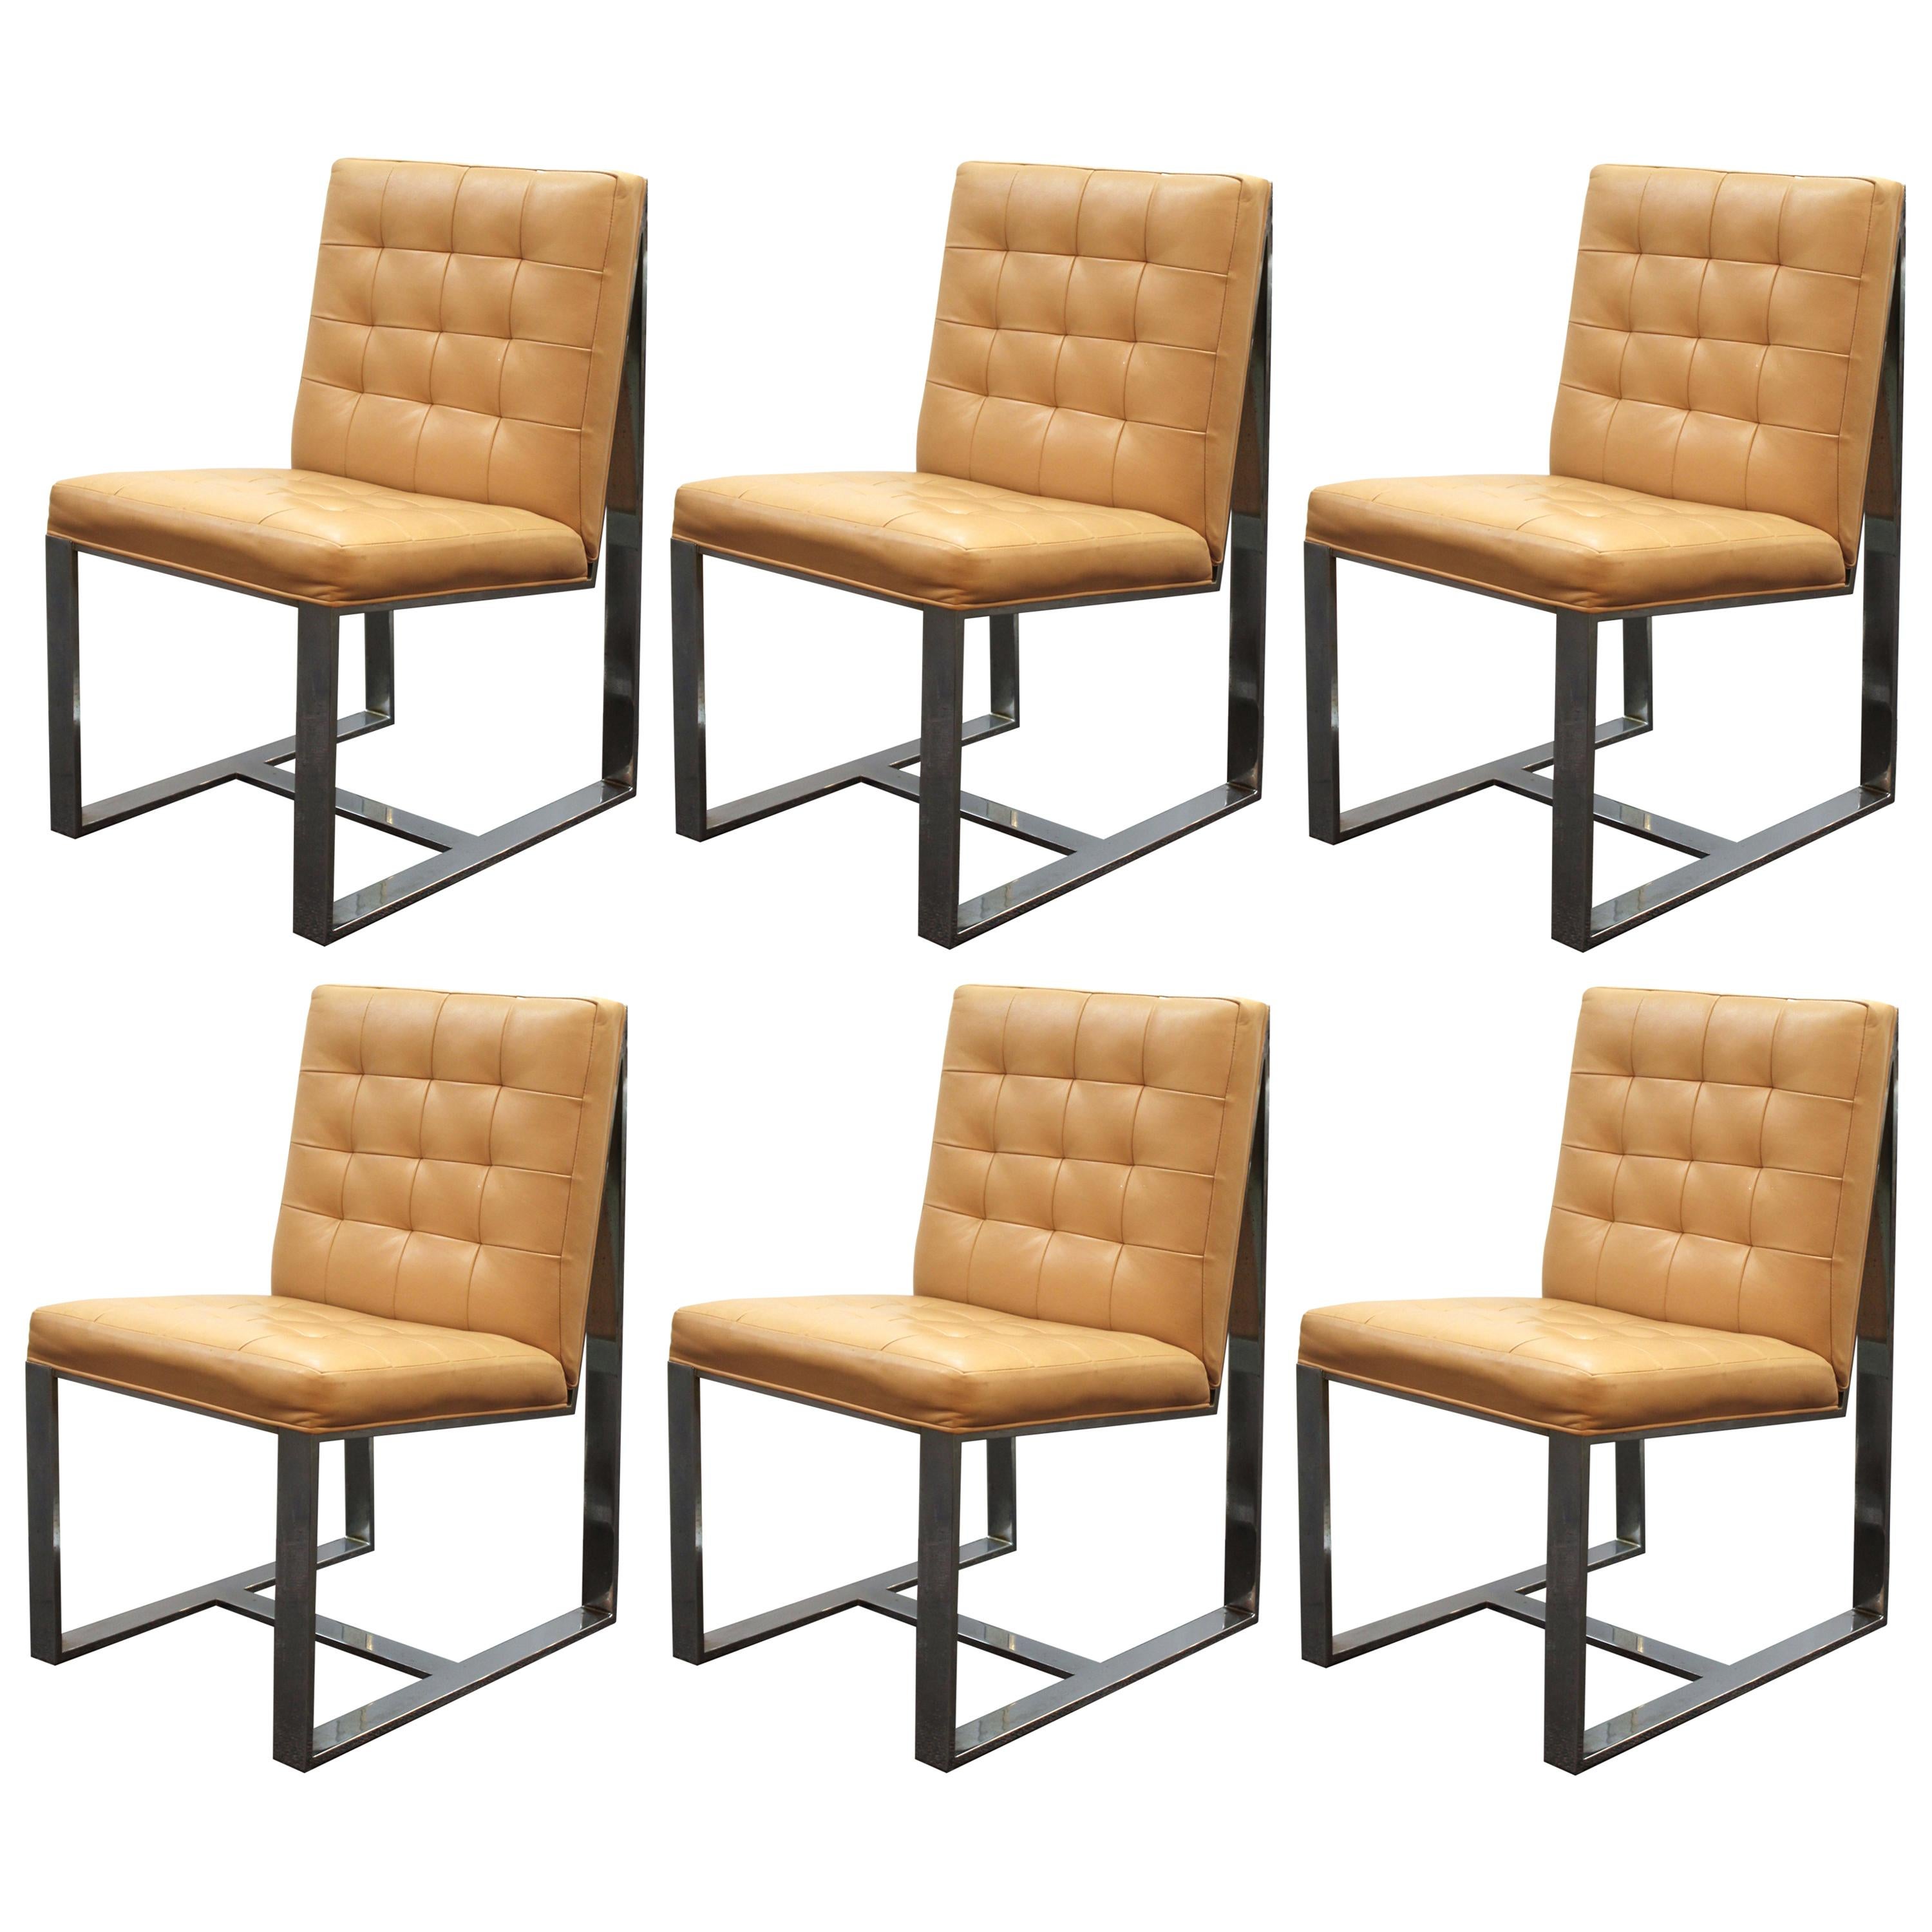 Milo Baughman Mid-Century Modern Cantilevered Chrome Dining Chairs